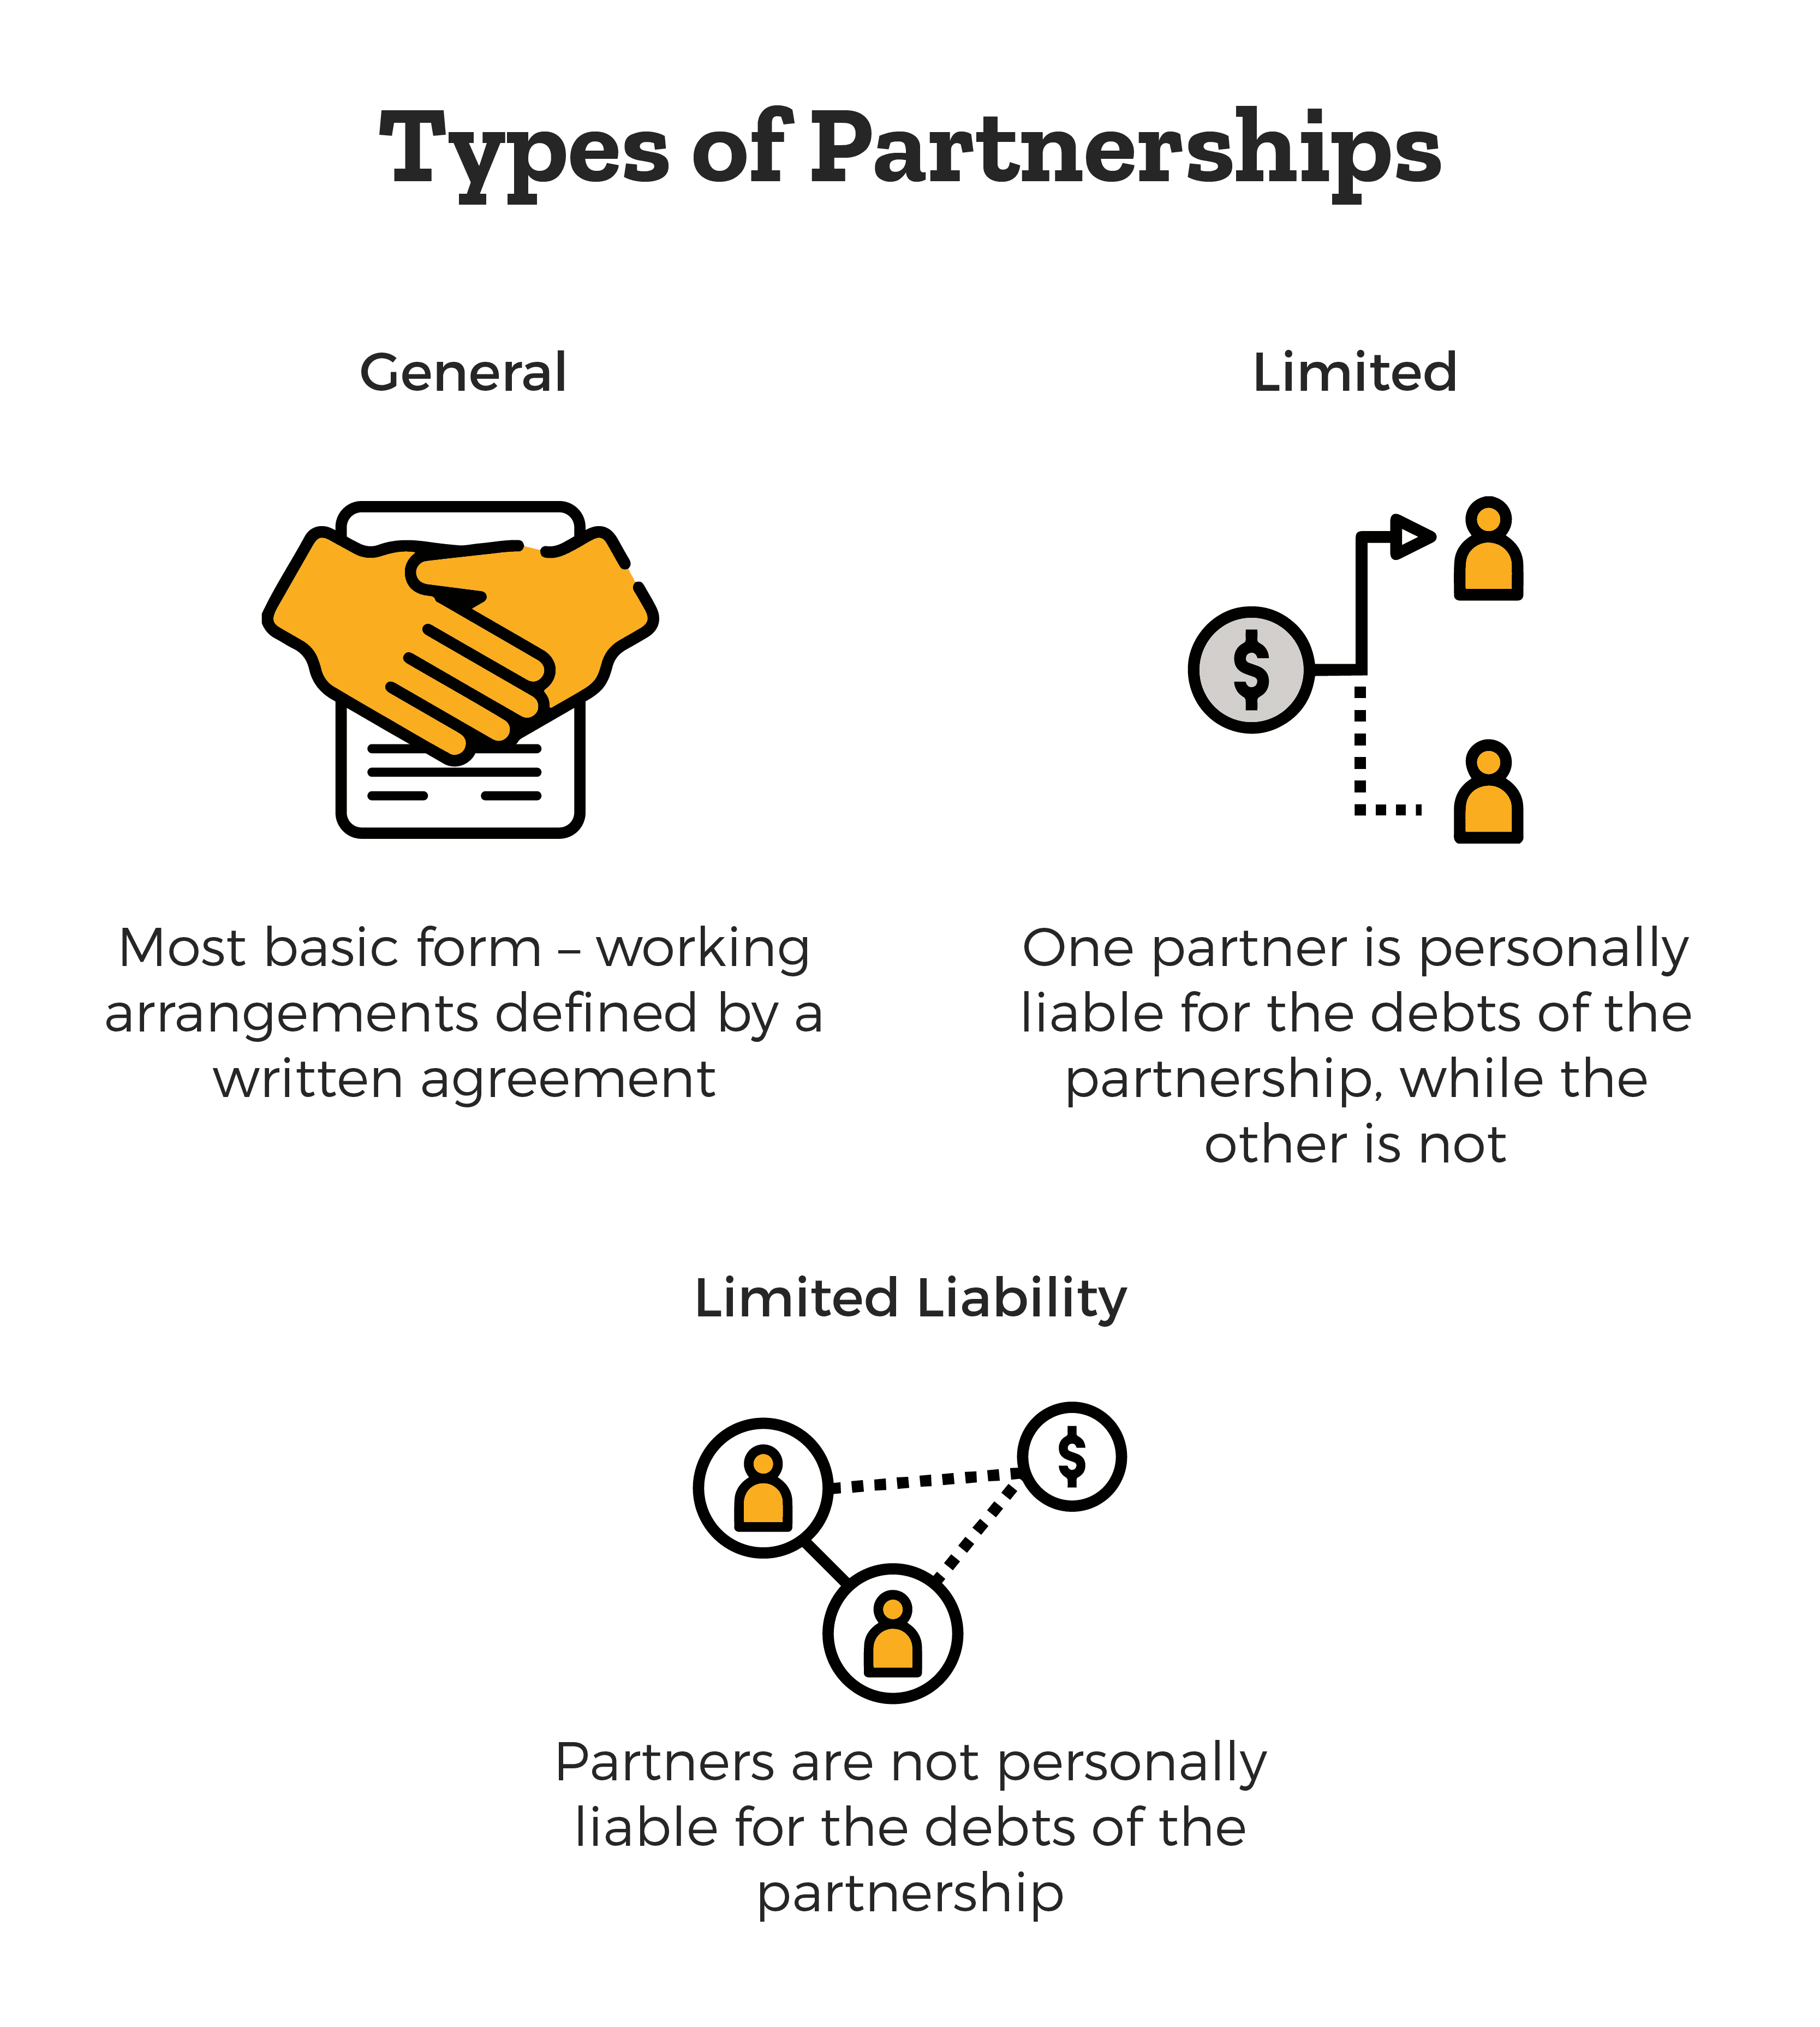 Types of Business Partnerships - general, limited, limited liability